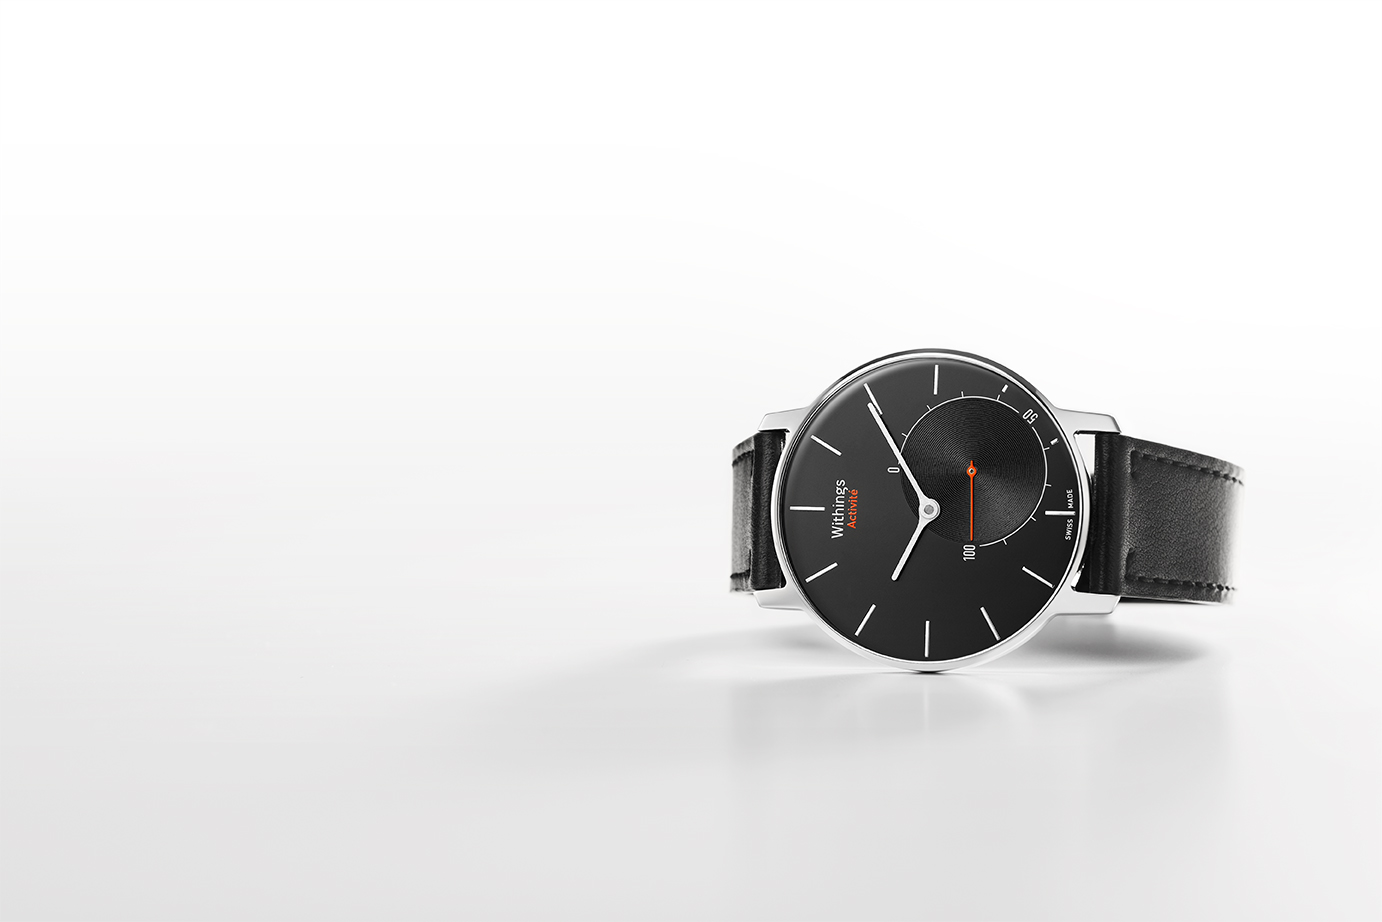 7.Withings_Activité_black_side